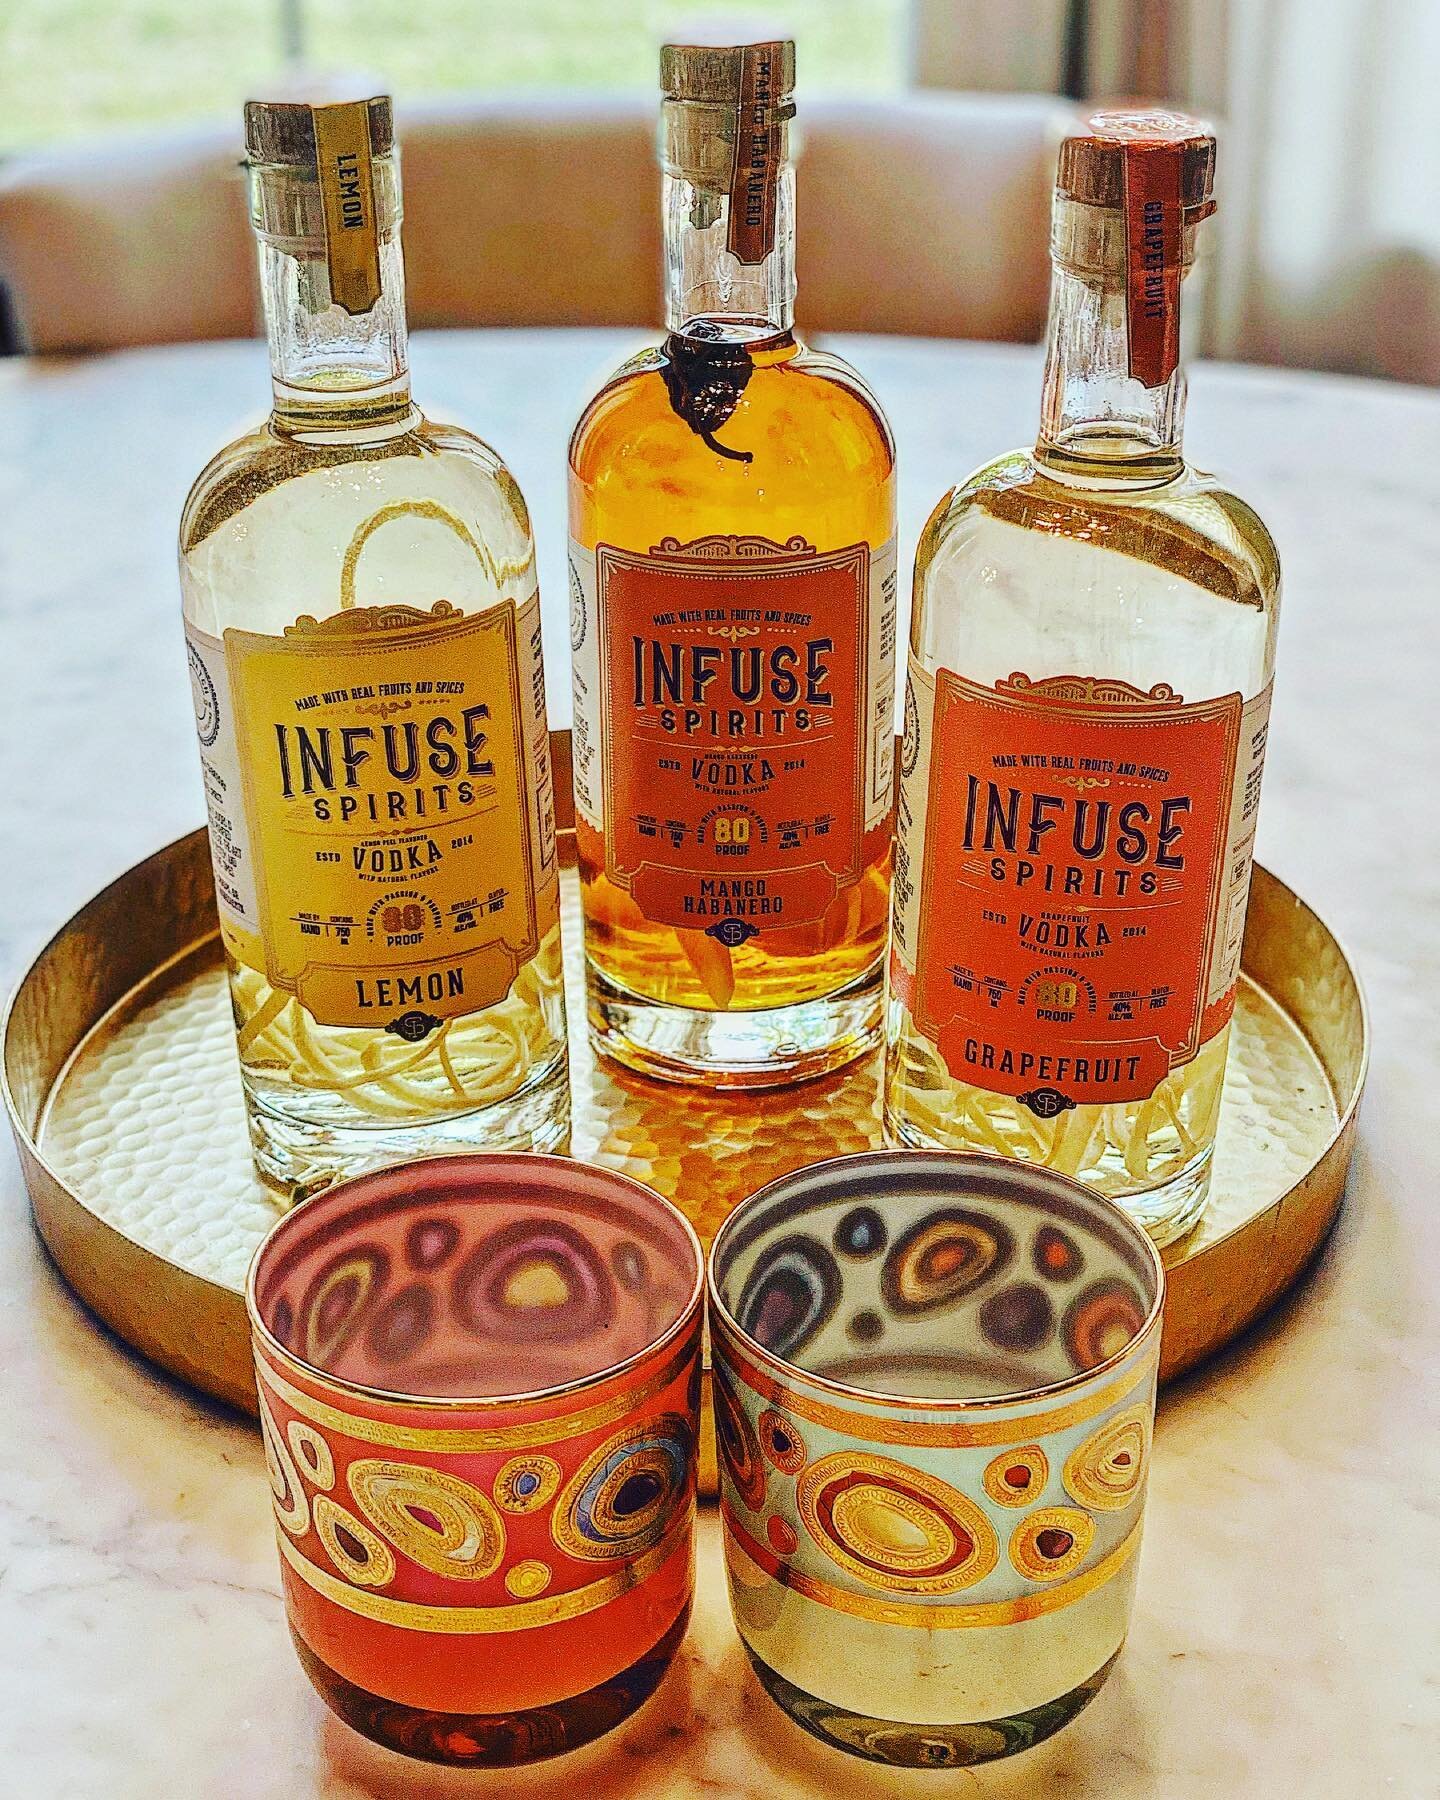 Hakuna Ma&rsquo;Vodka
_________________________________
It means no worries for the rest of your days! 🎶
.
.
.
Have you tried this Infuse Spirits Vodka?! If not, ask for it in your next package, and gift it to yourself because WHY NOT?! Treat yourse